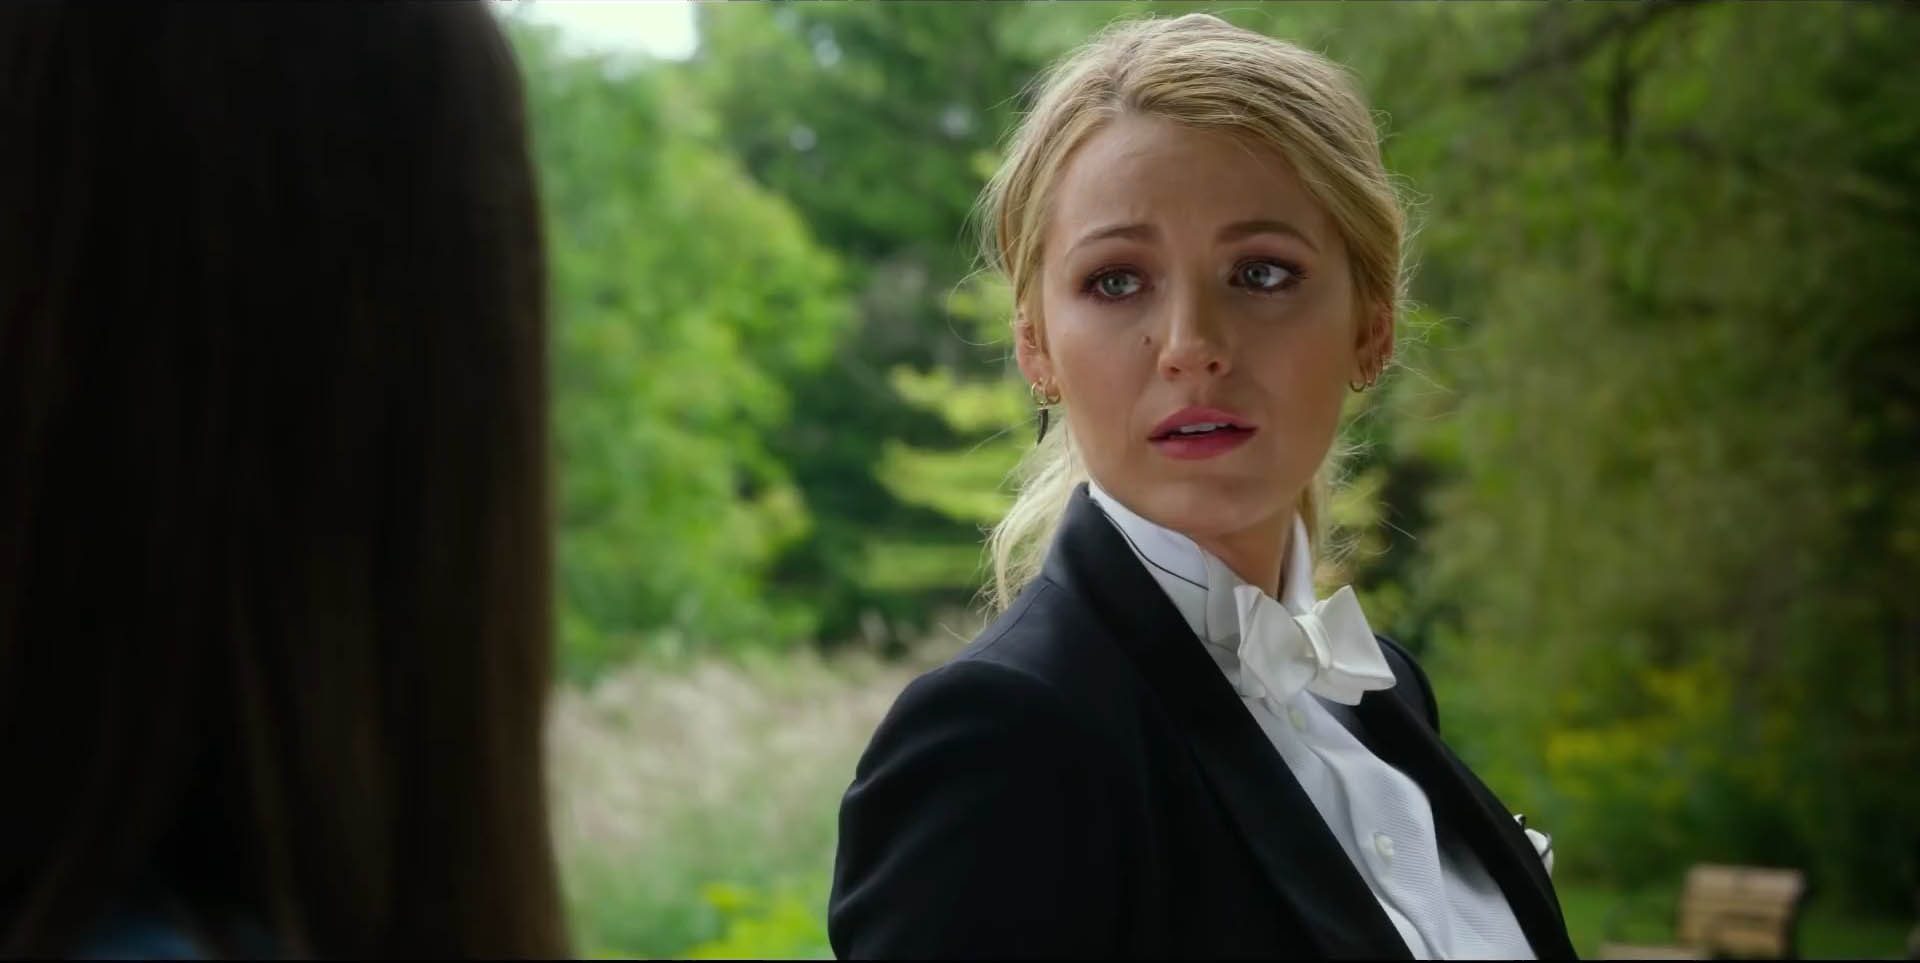 A Simple Favor Trailer - What Happened to Emily? | The Nerdy1920 x 963